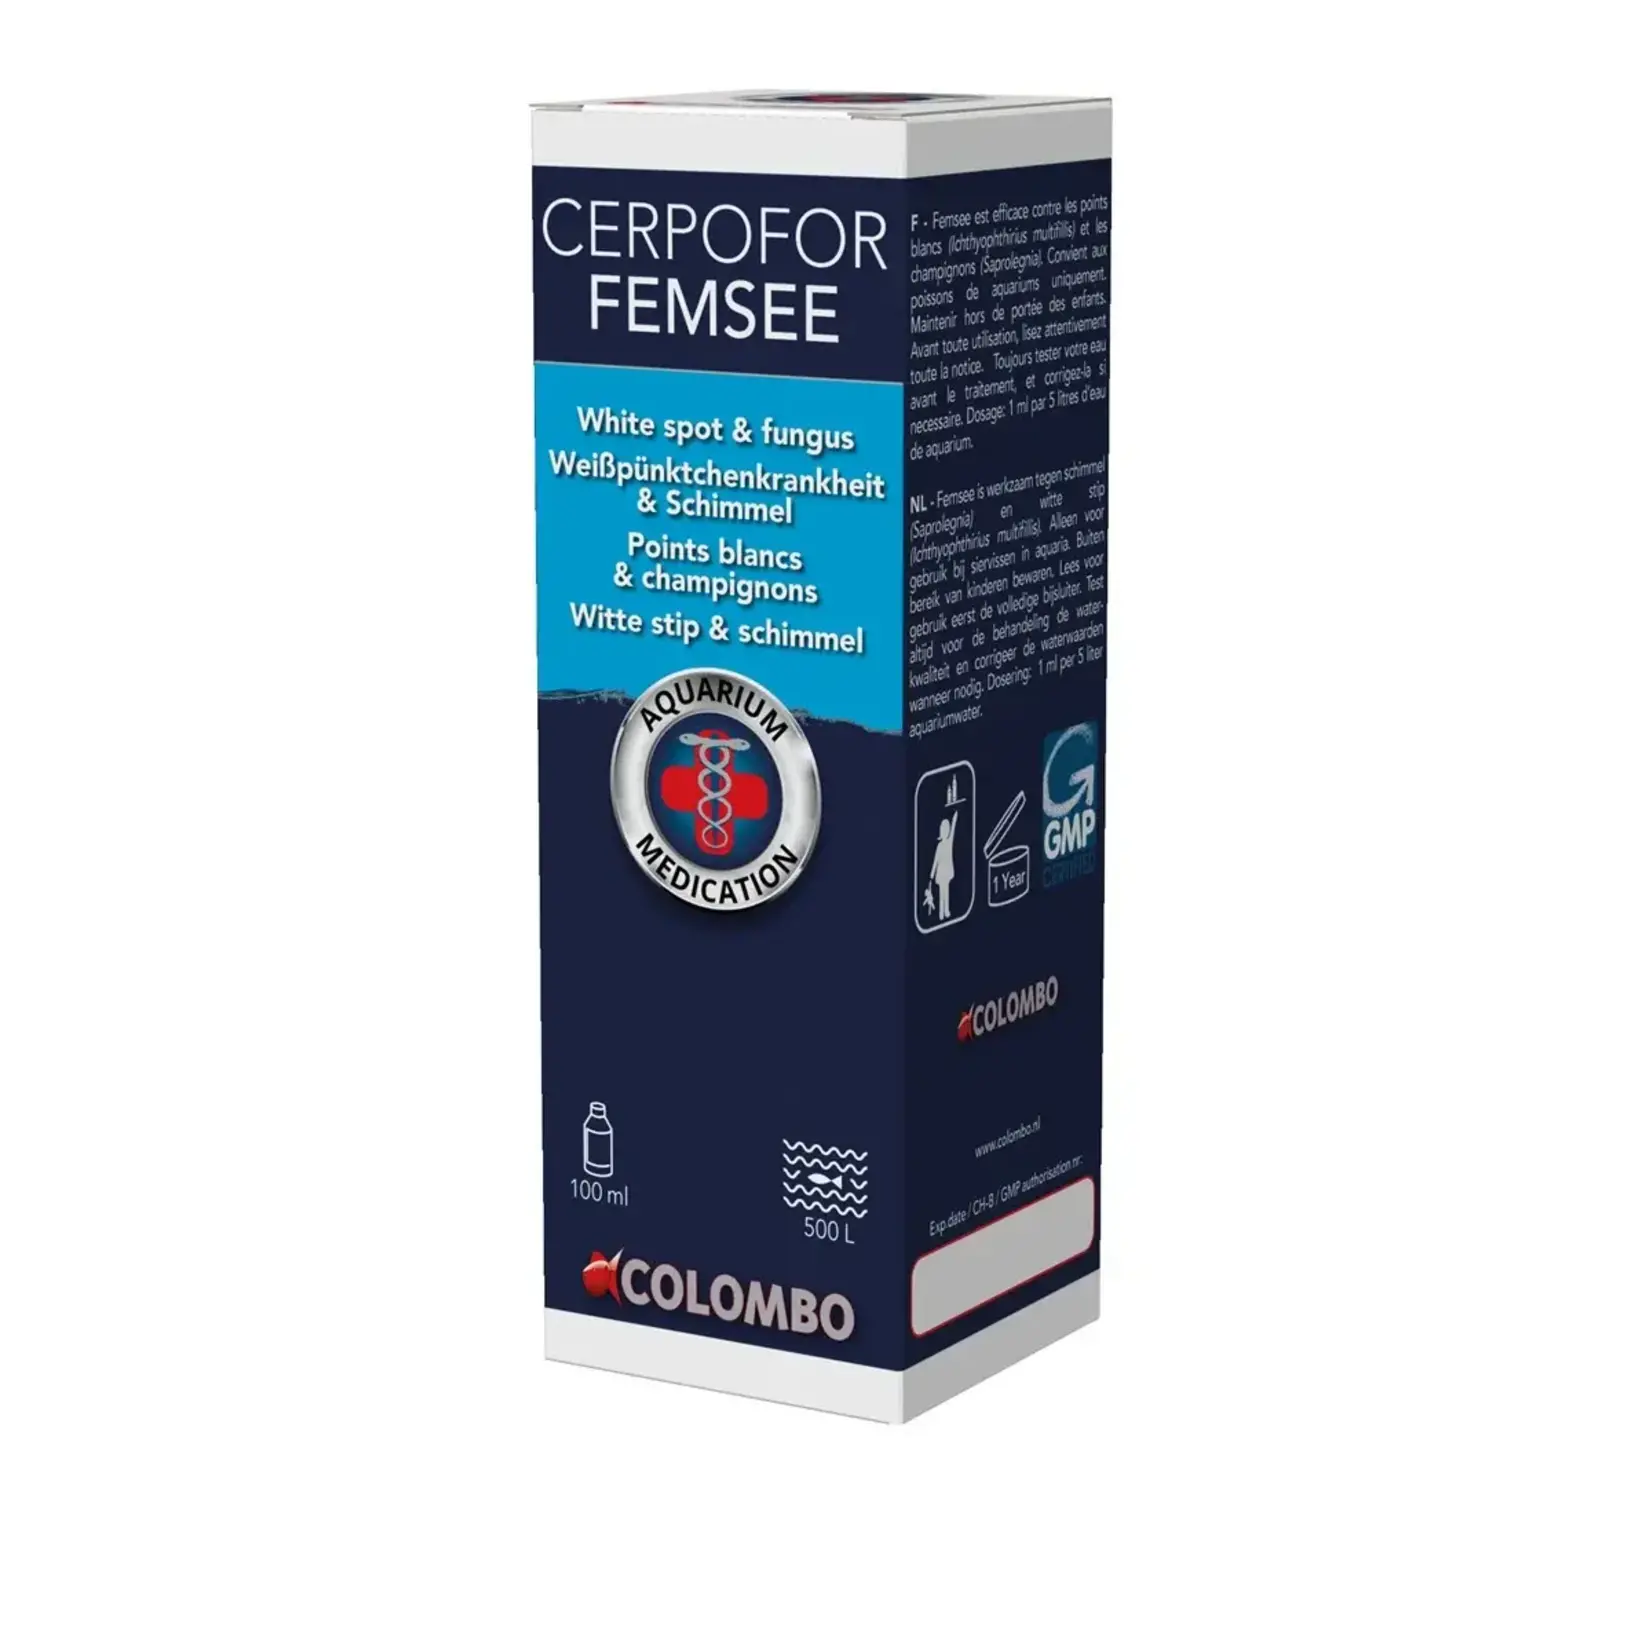 Cerpofor femsee 100ml / 500l